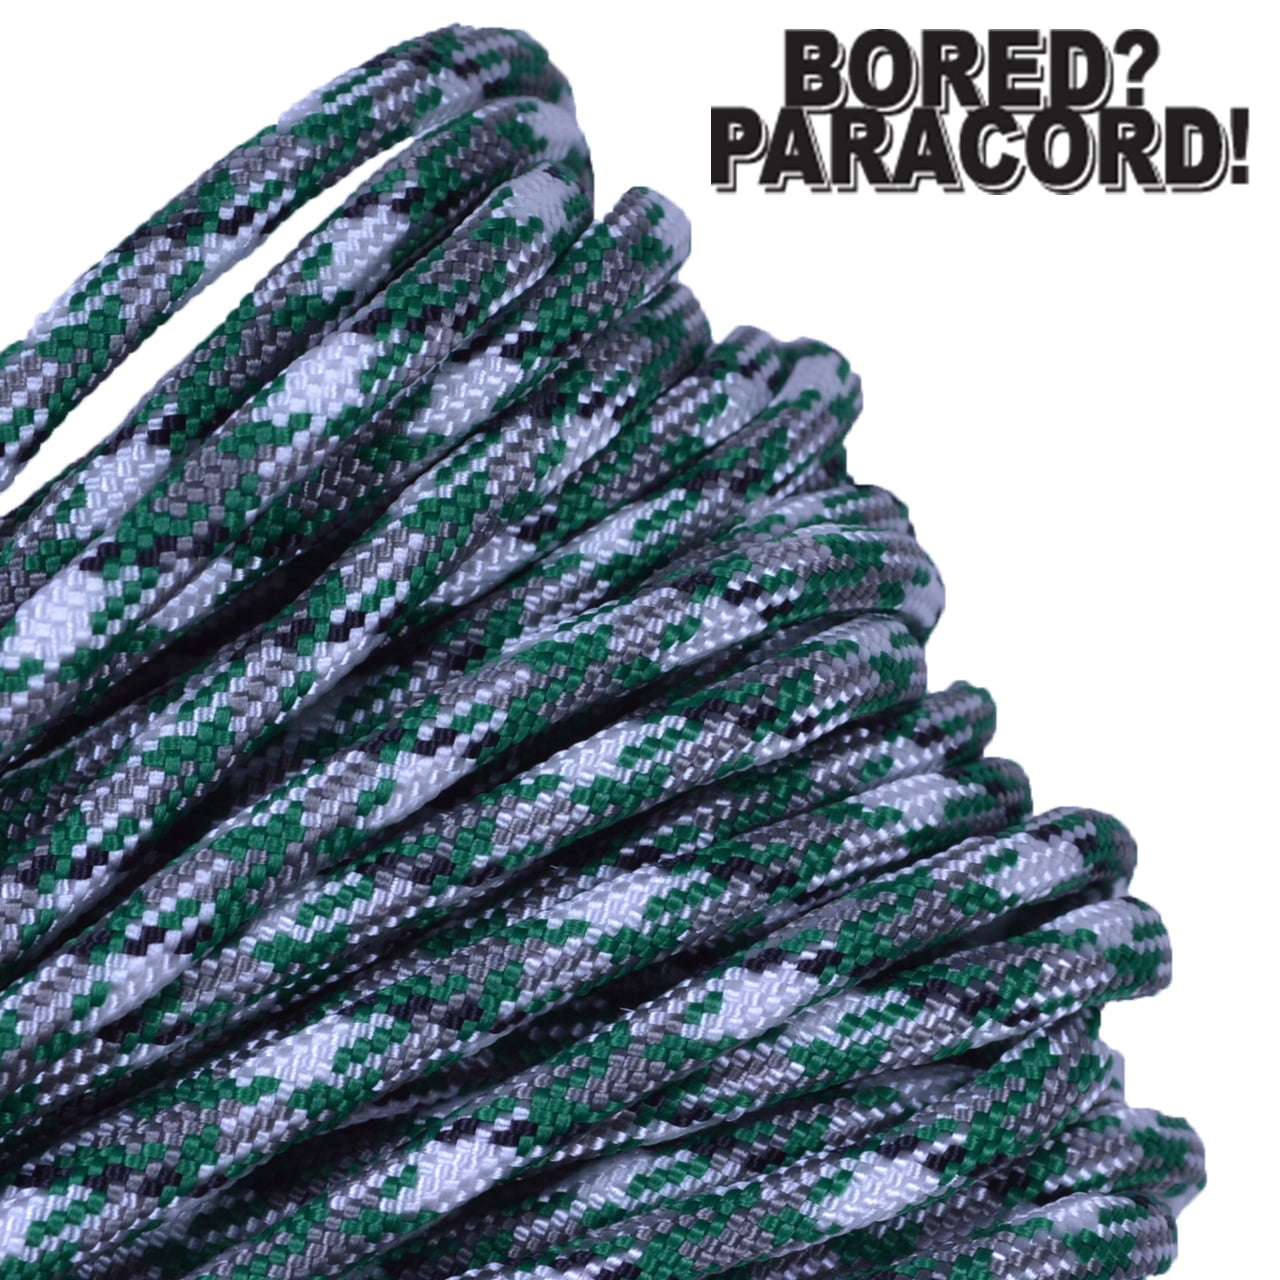 Kelly Green Paracord 1000 Foot 550 lb 7 Strand Camping Survival Bracelet Rope